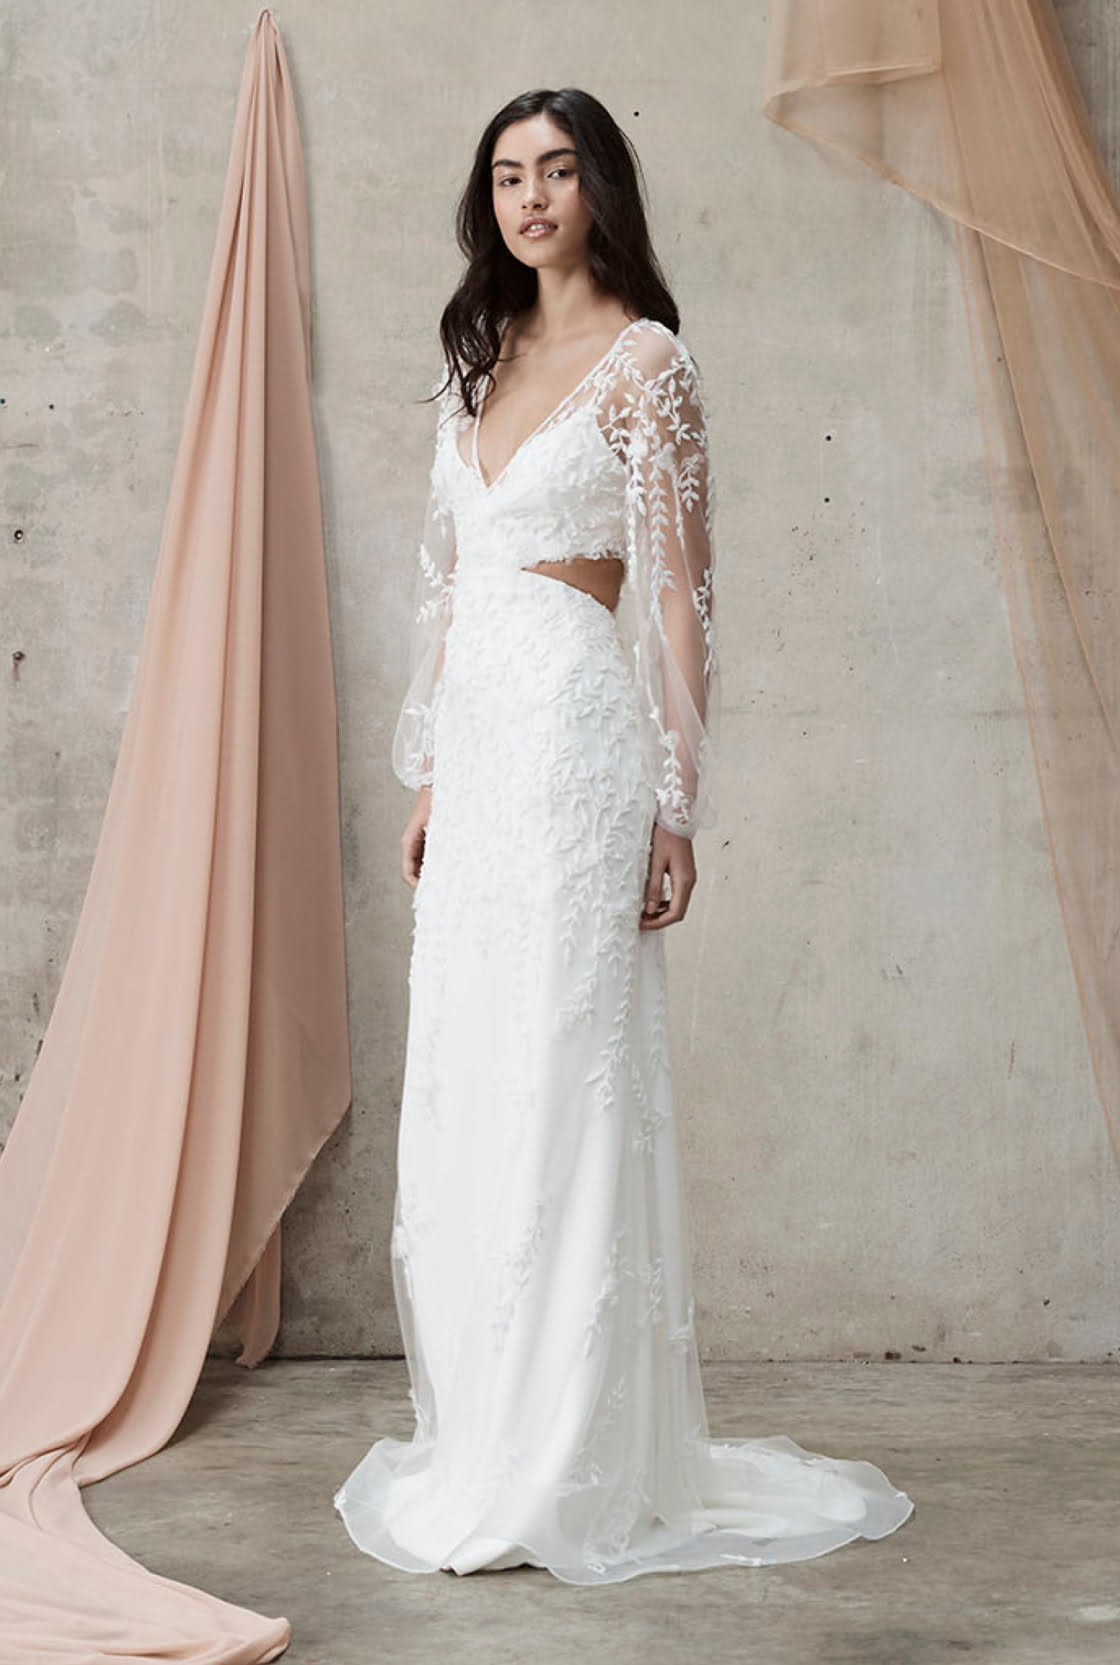 20 OF OUR FAVE BRIDAL GOWNS WITH CUT OUTS – Hello May